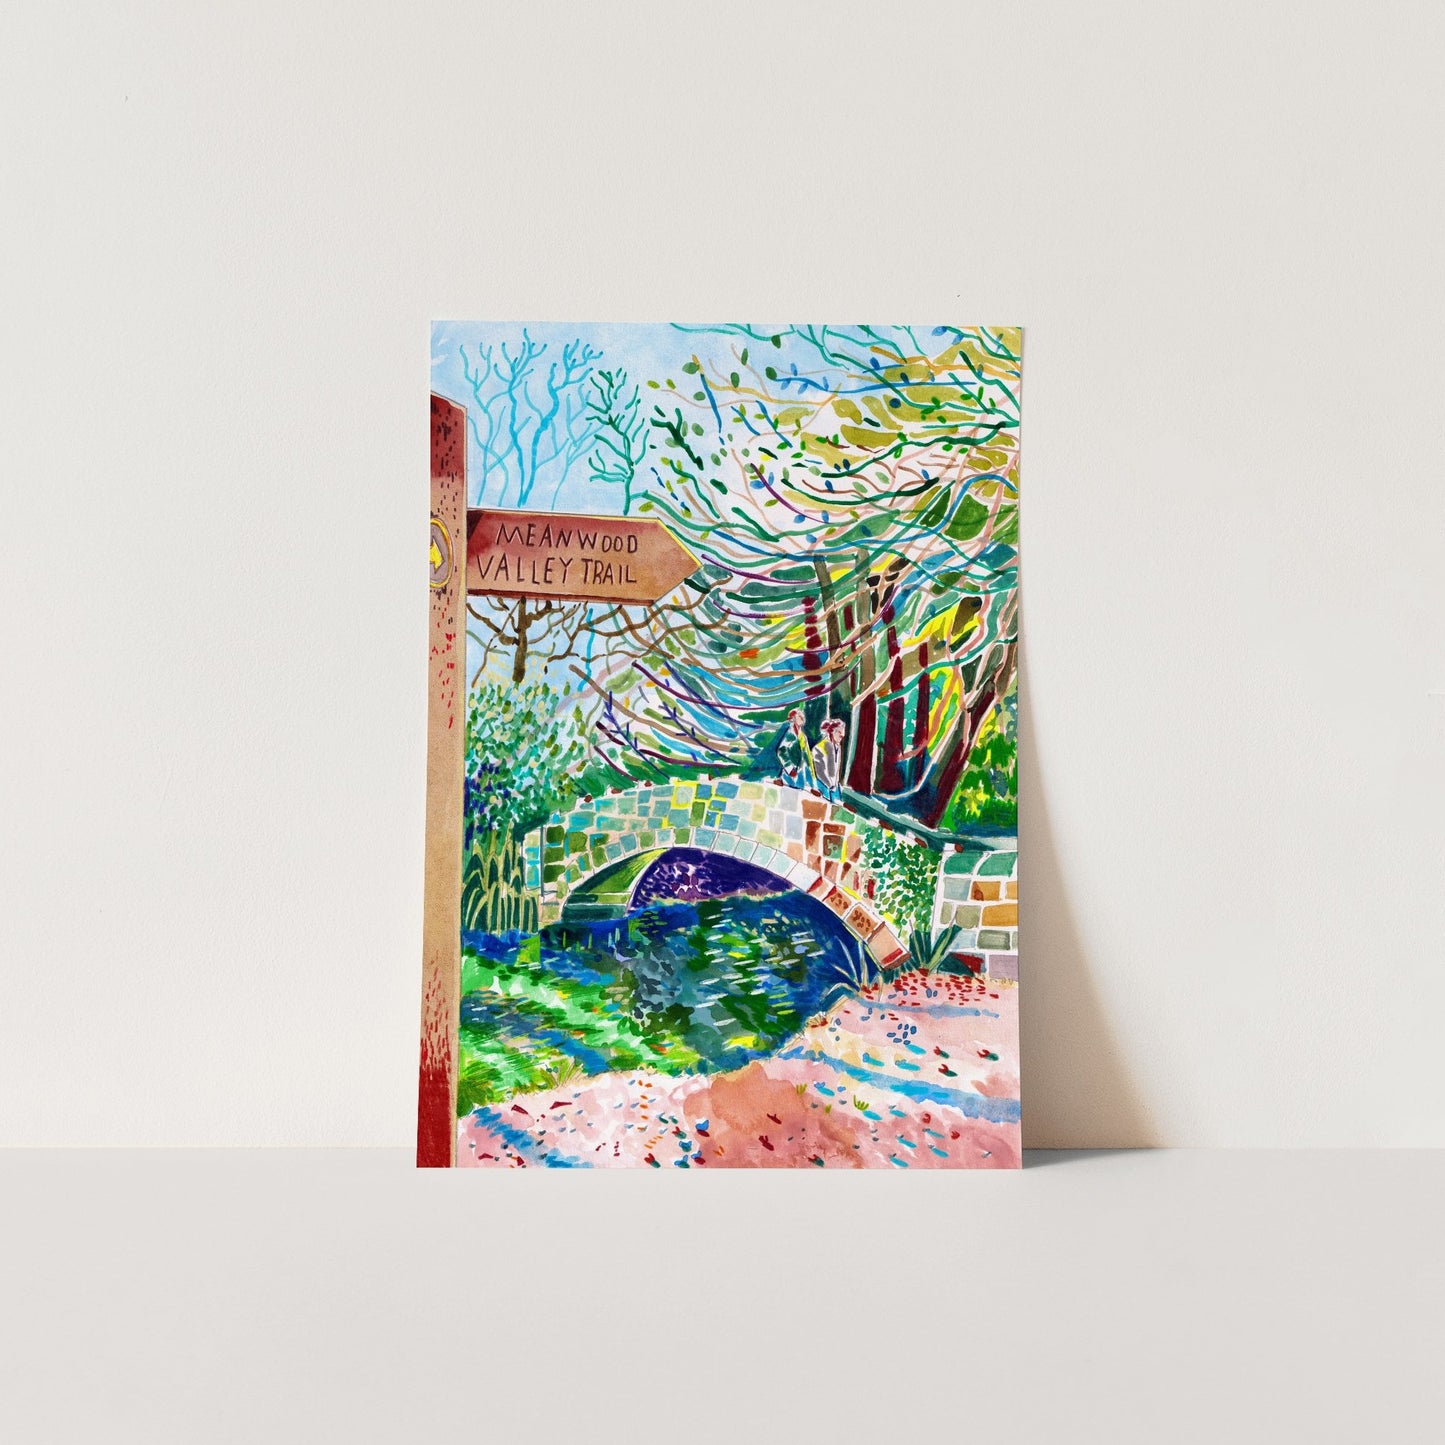 Meanwood valley trail art print